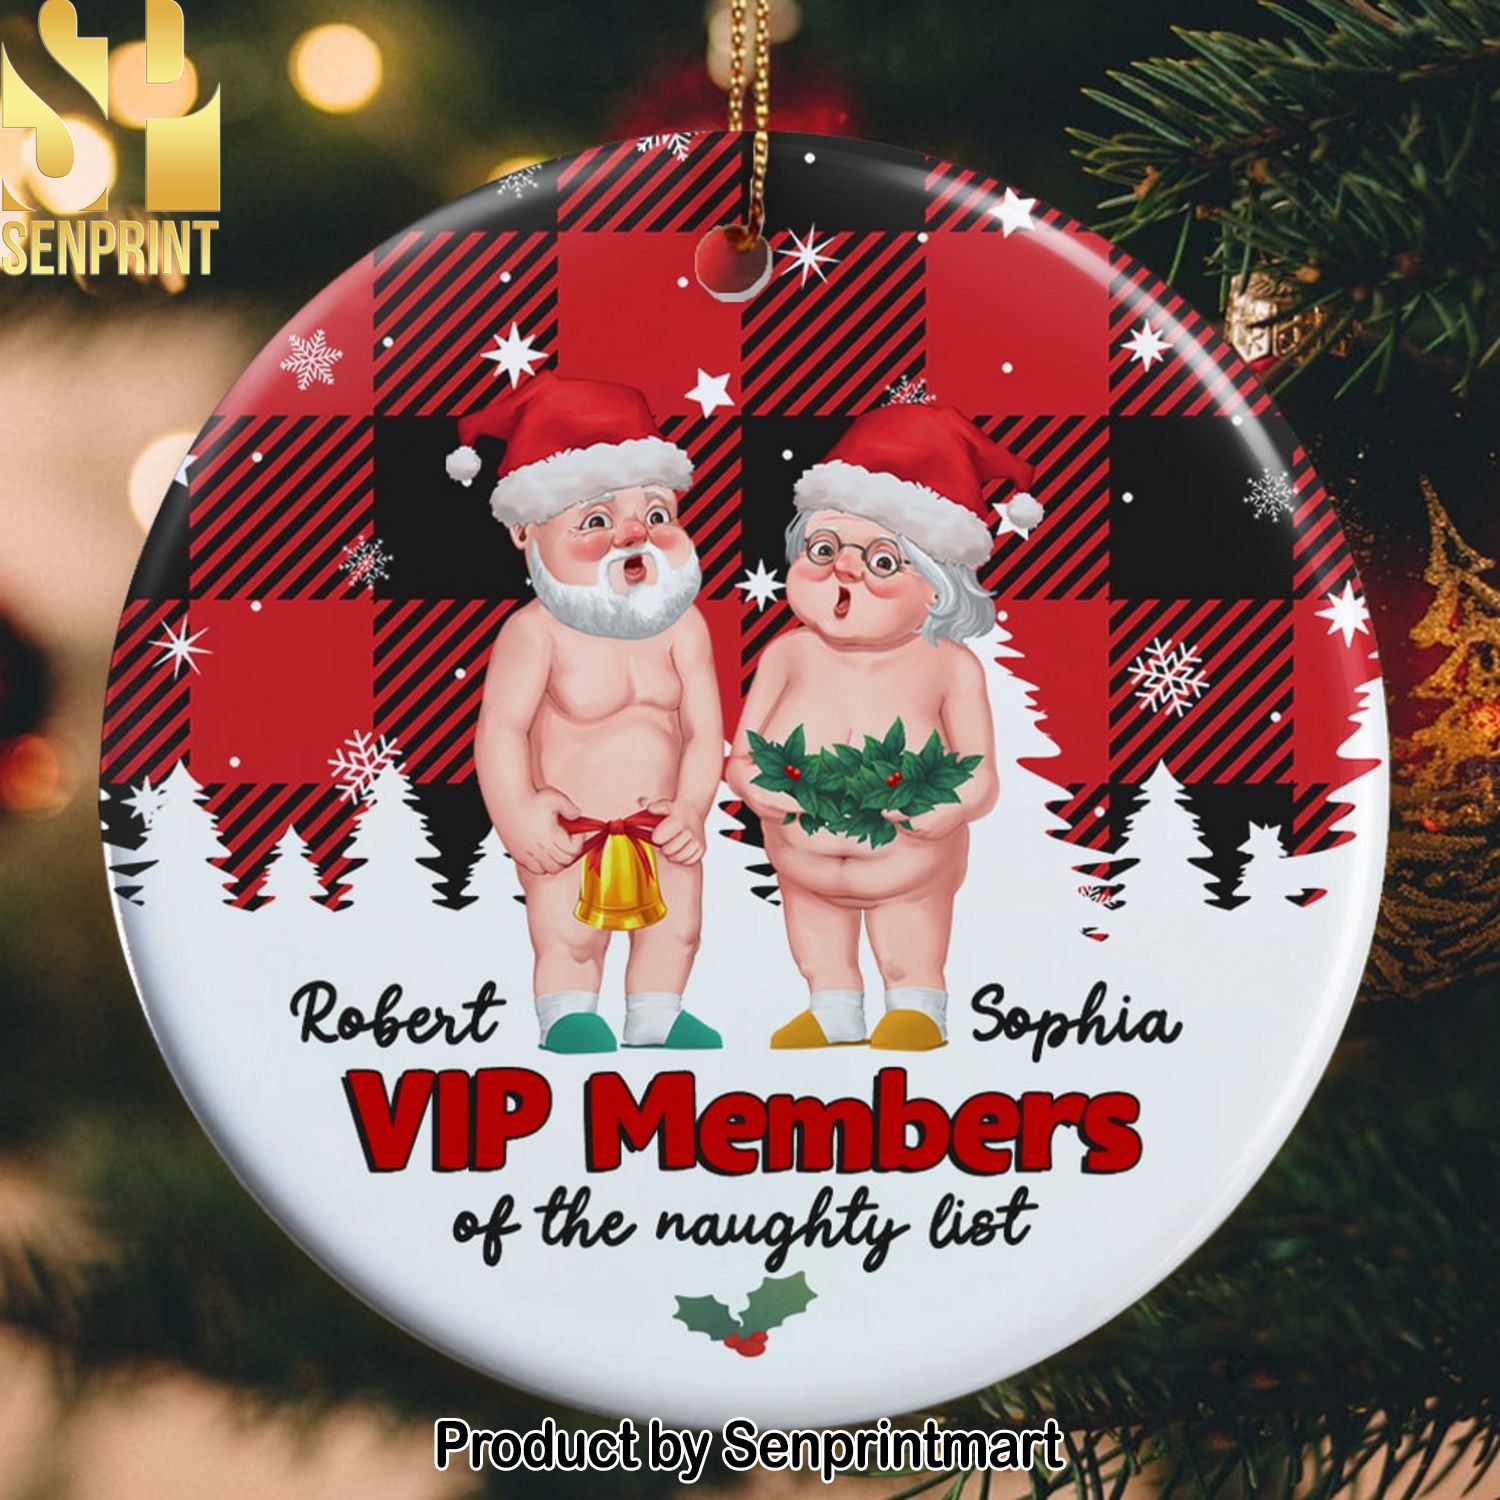 Couple, Vip Member Of The Naughty List, Personalized Ornament, Christmas Gifts For Couple